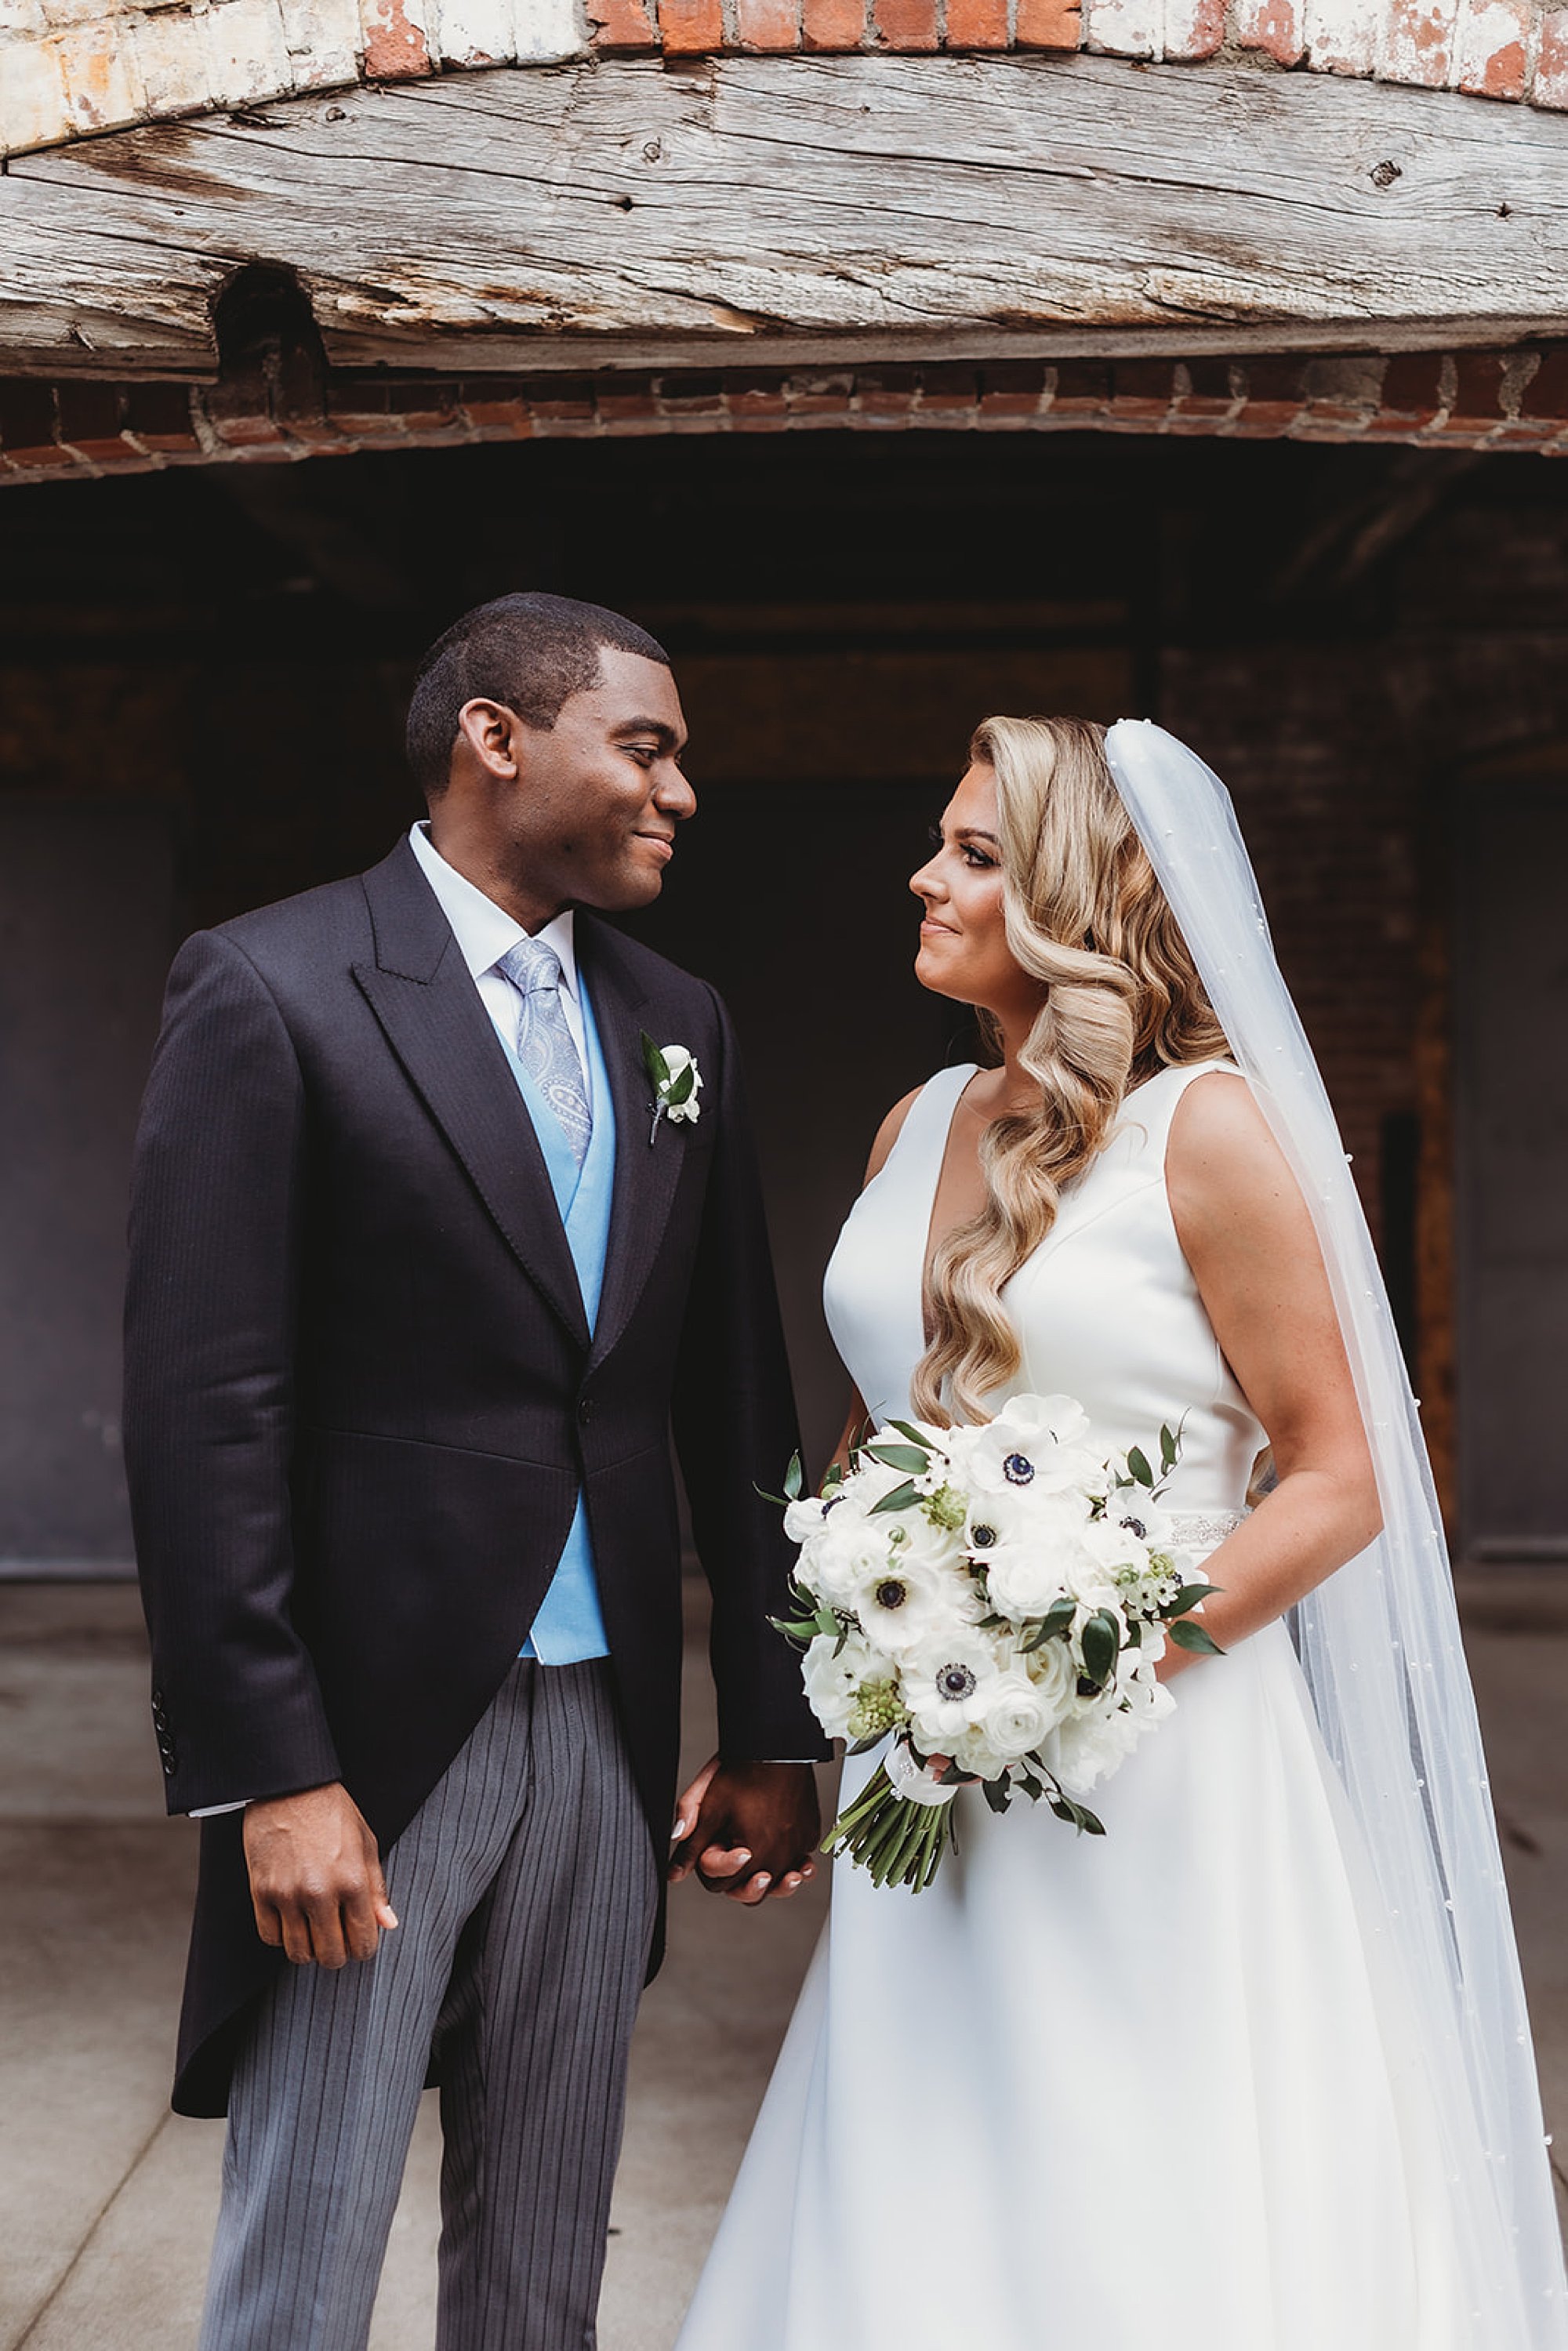 bride and groom smile at each other during portraits near brick building 